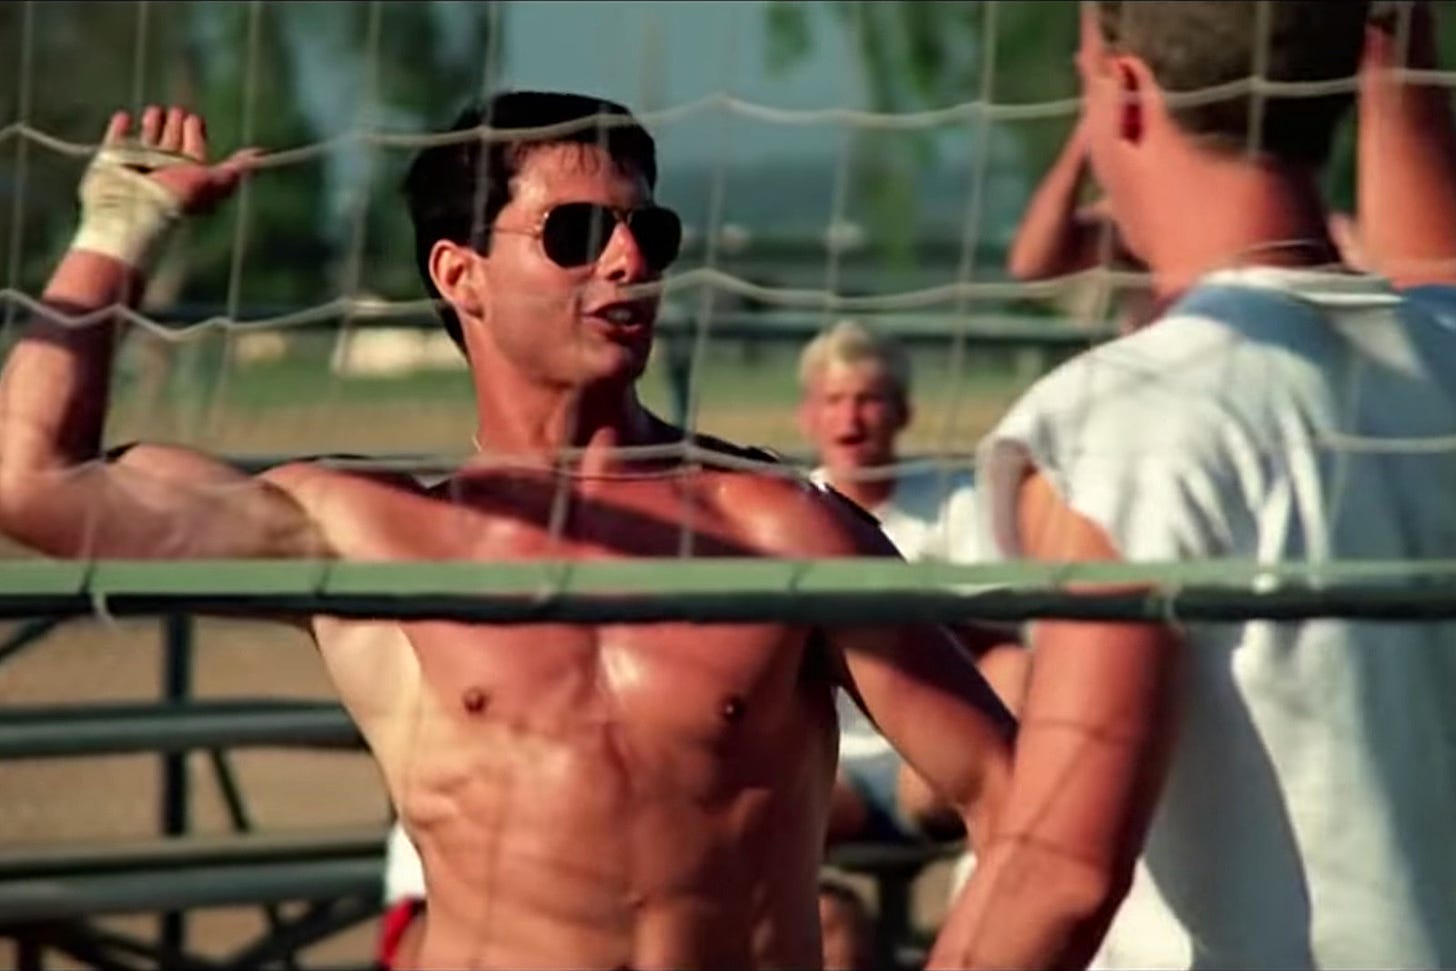 Why 'Top Gun' Features That 'Soft Porn' Volleyball Scene